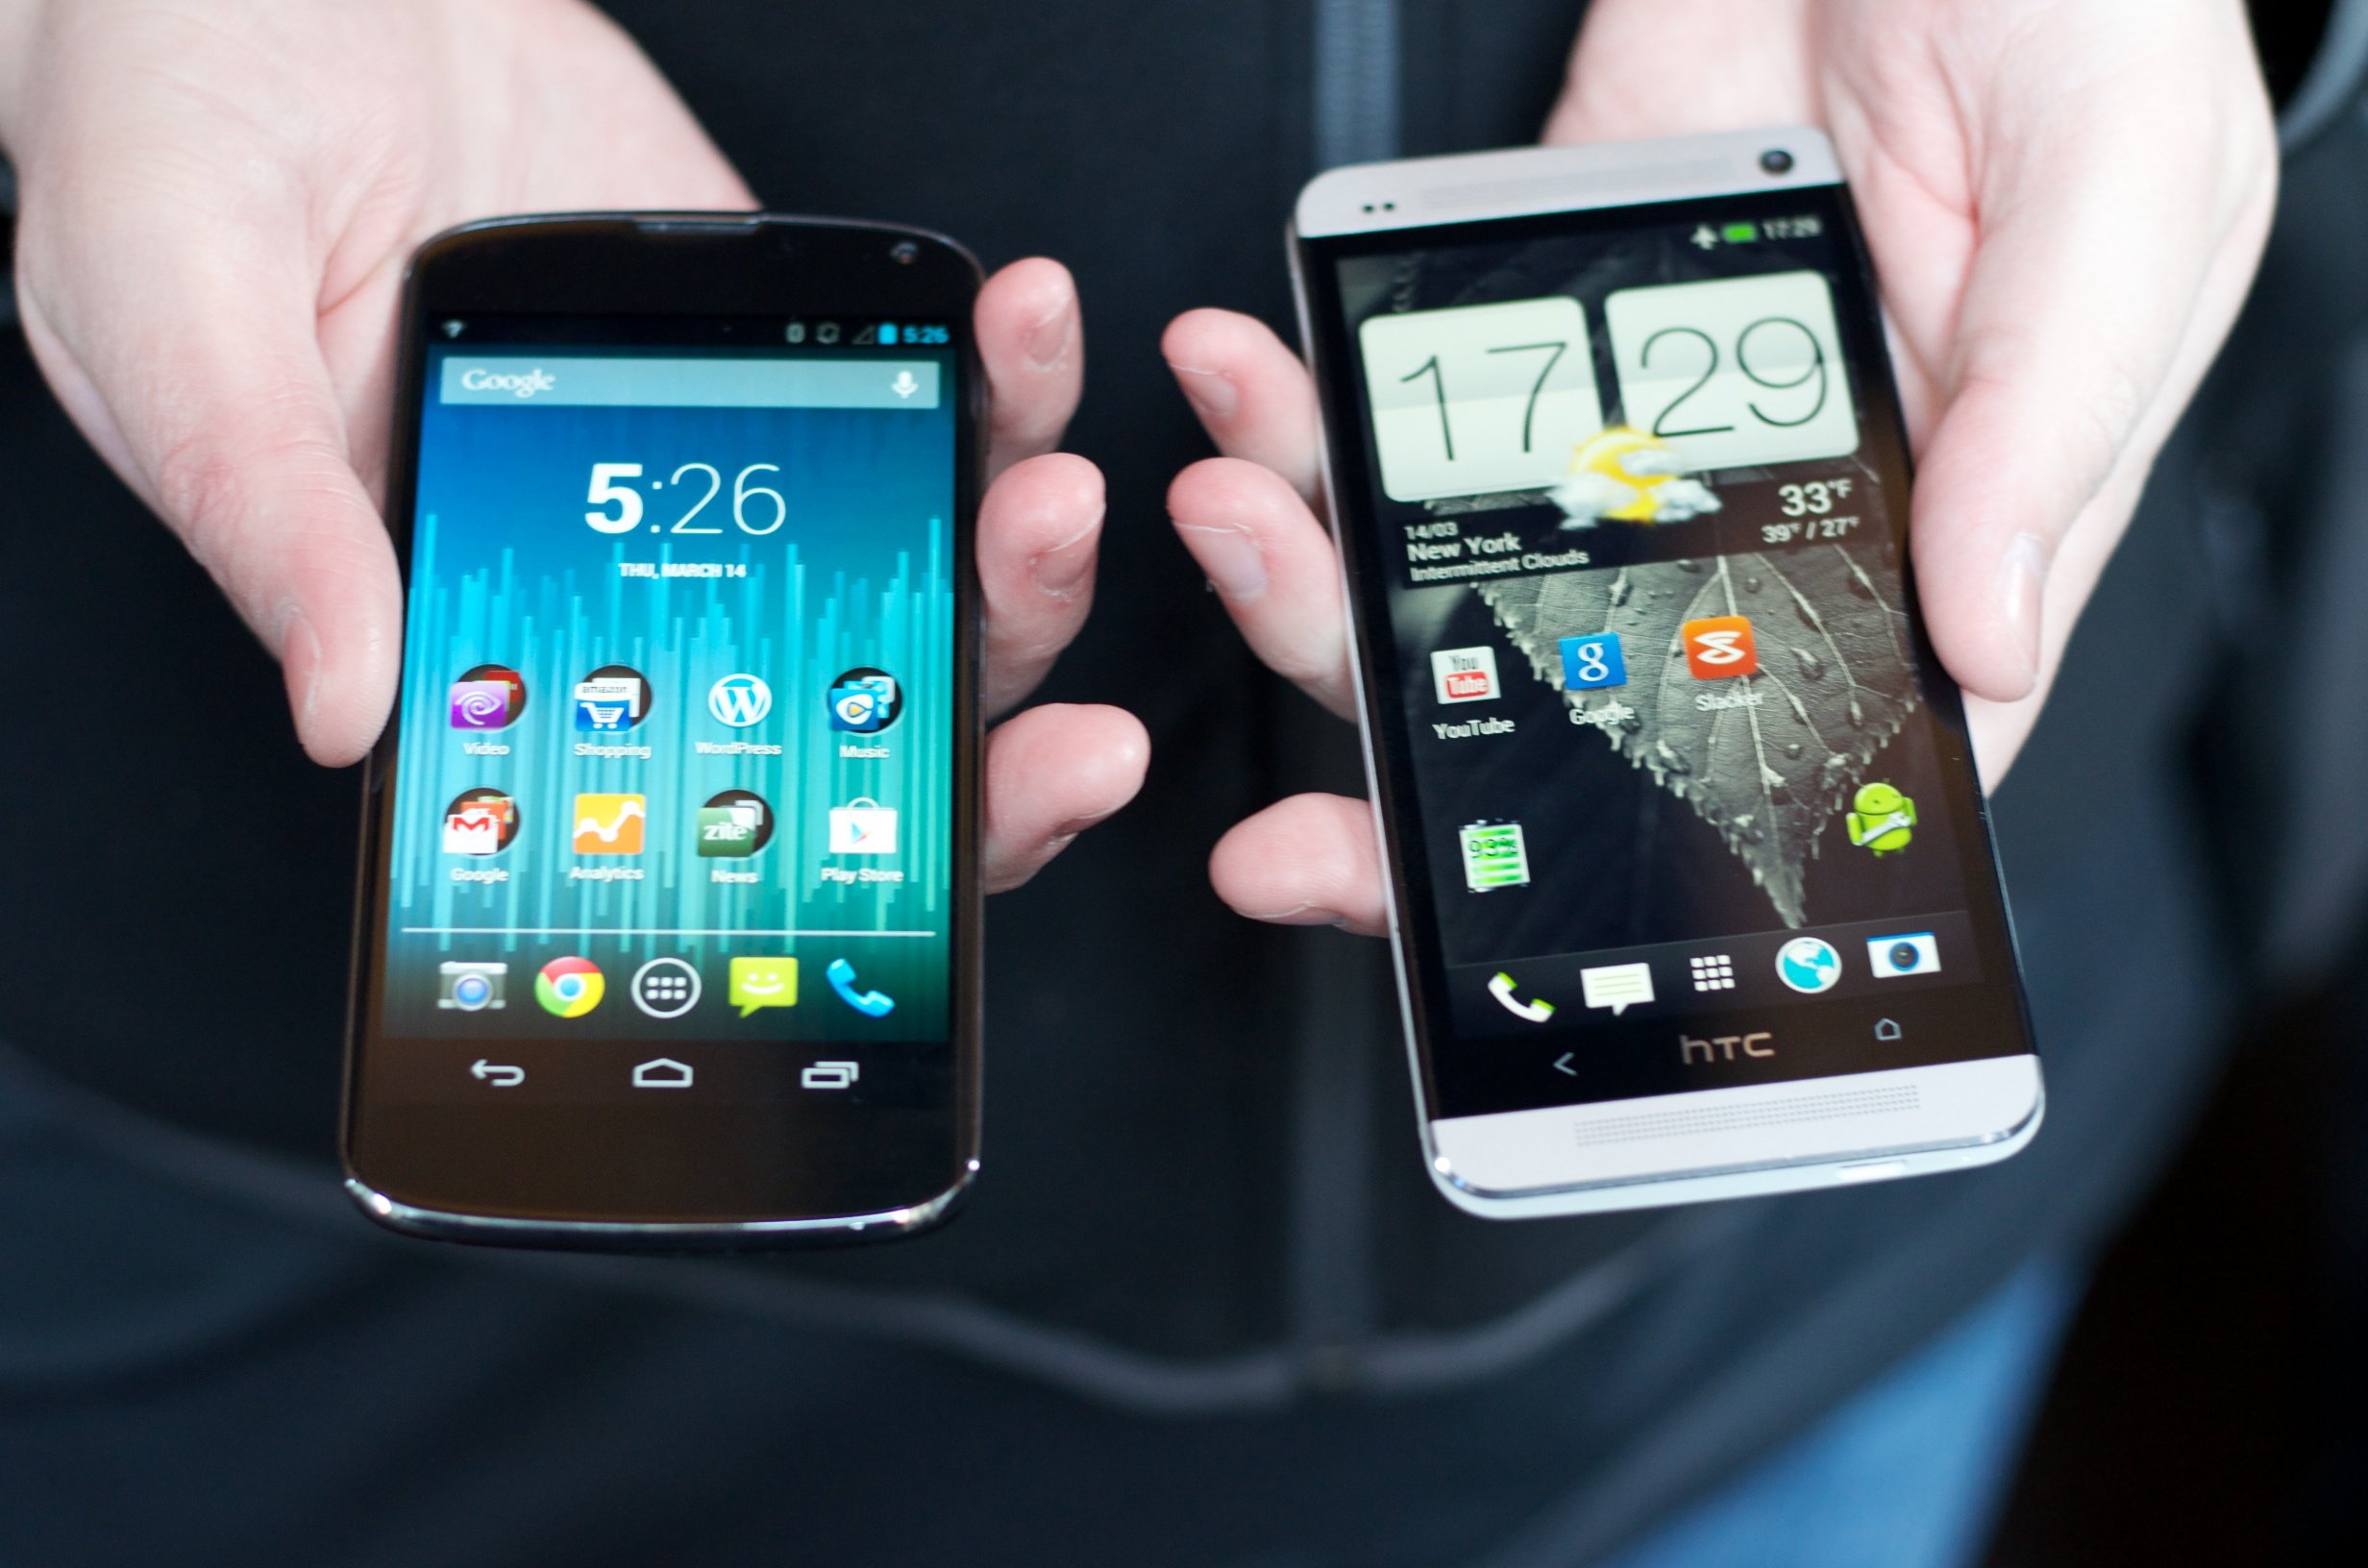 The HTC One software features help set it apart from devices like the Nexus 4.